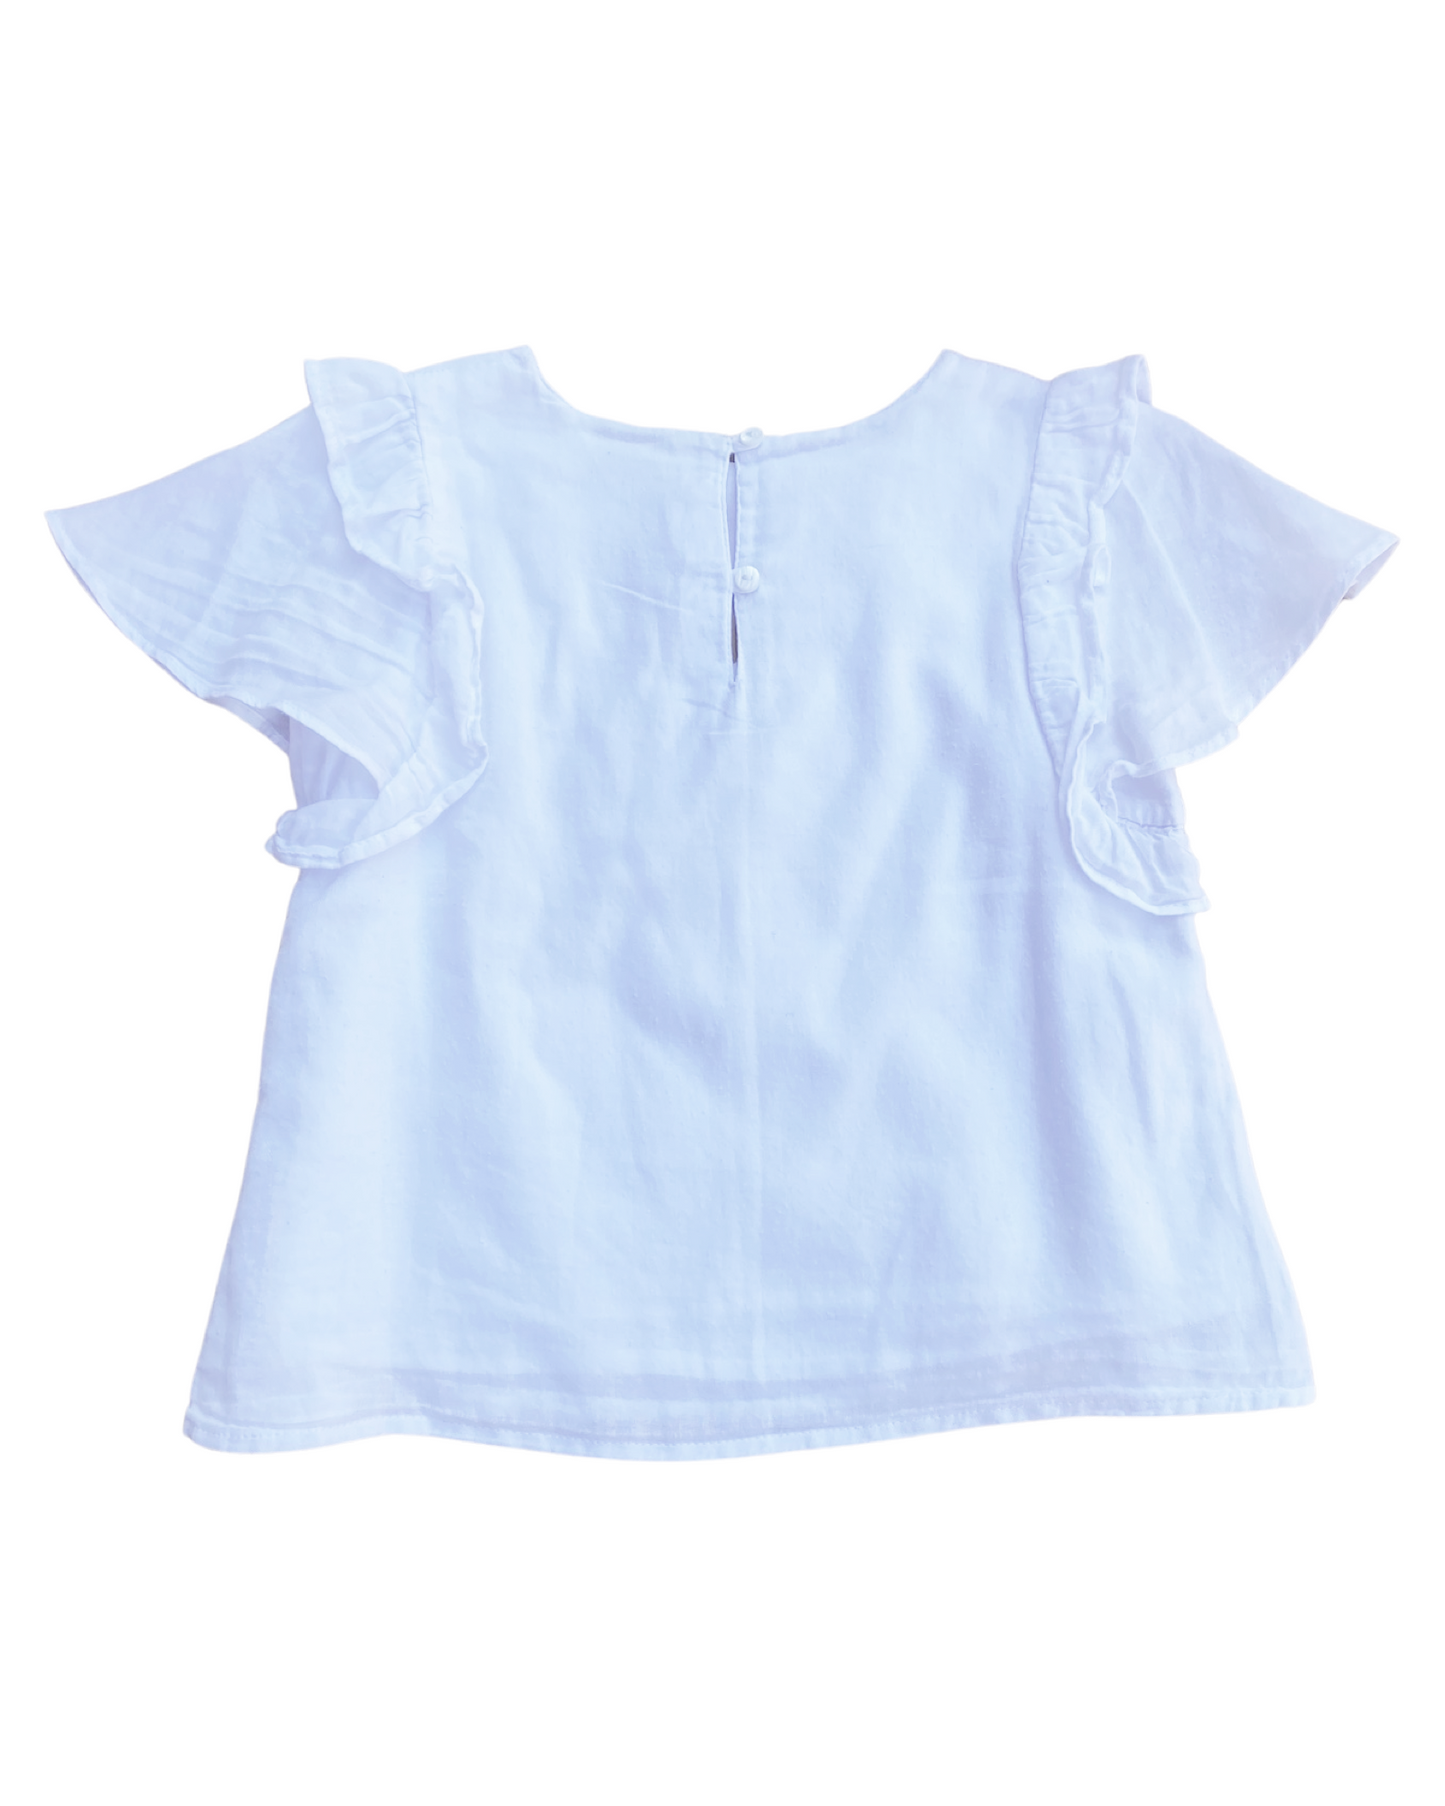 Baby Zara white cotton embroidered frill sleeve top (3-4yrs)